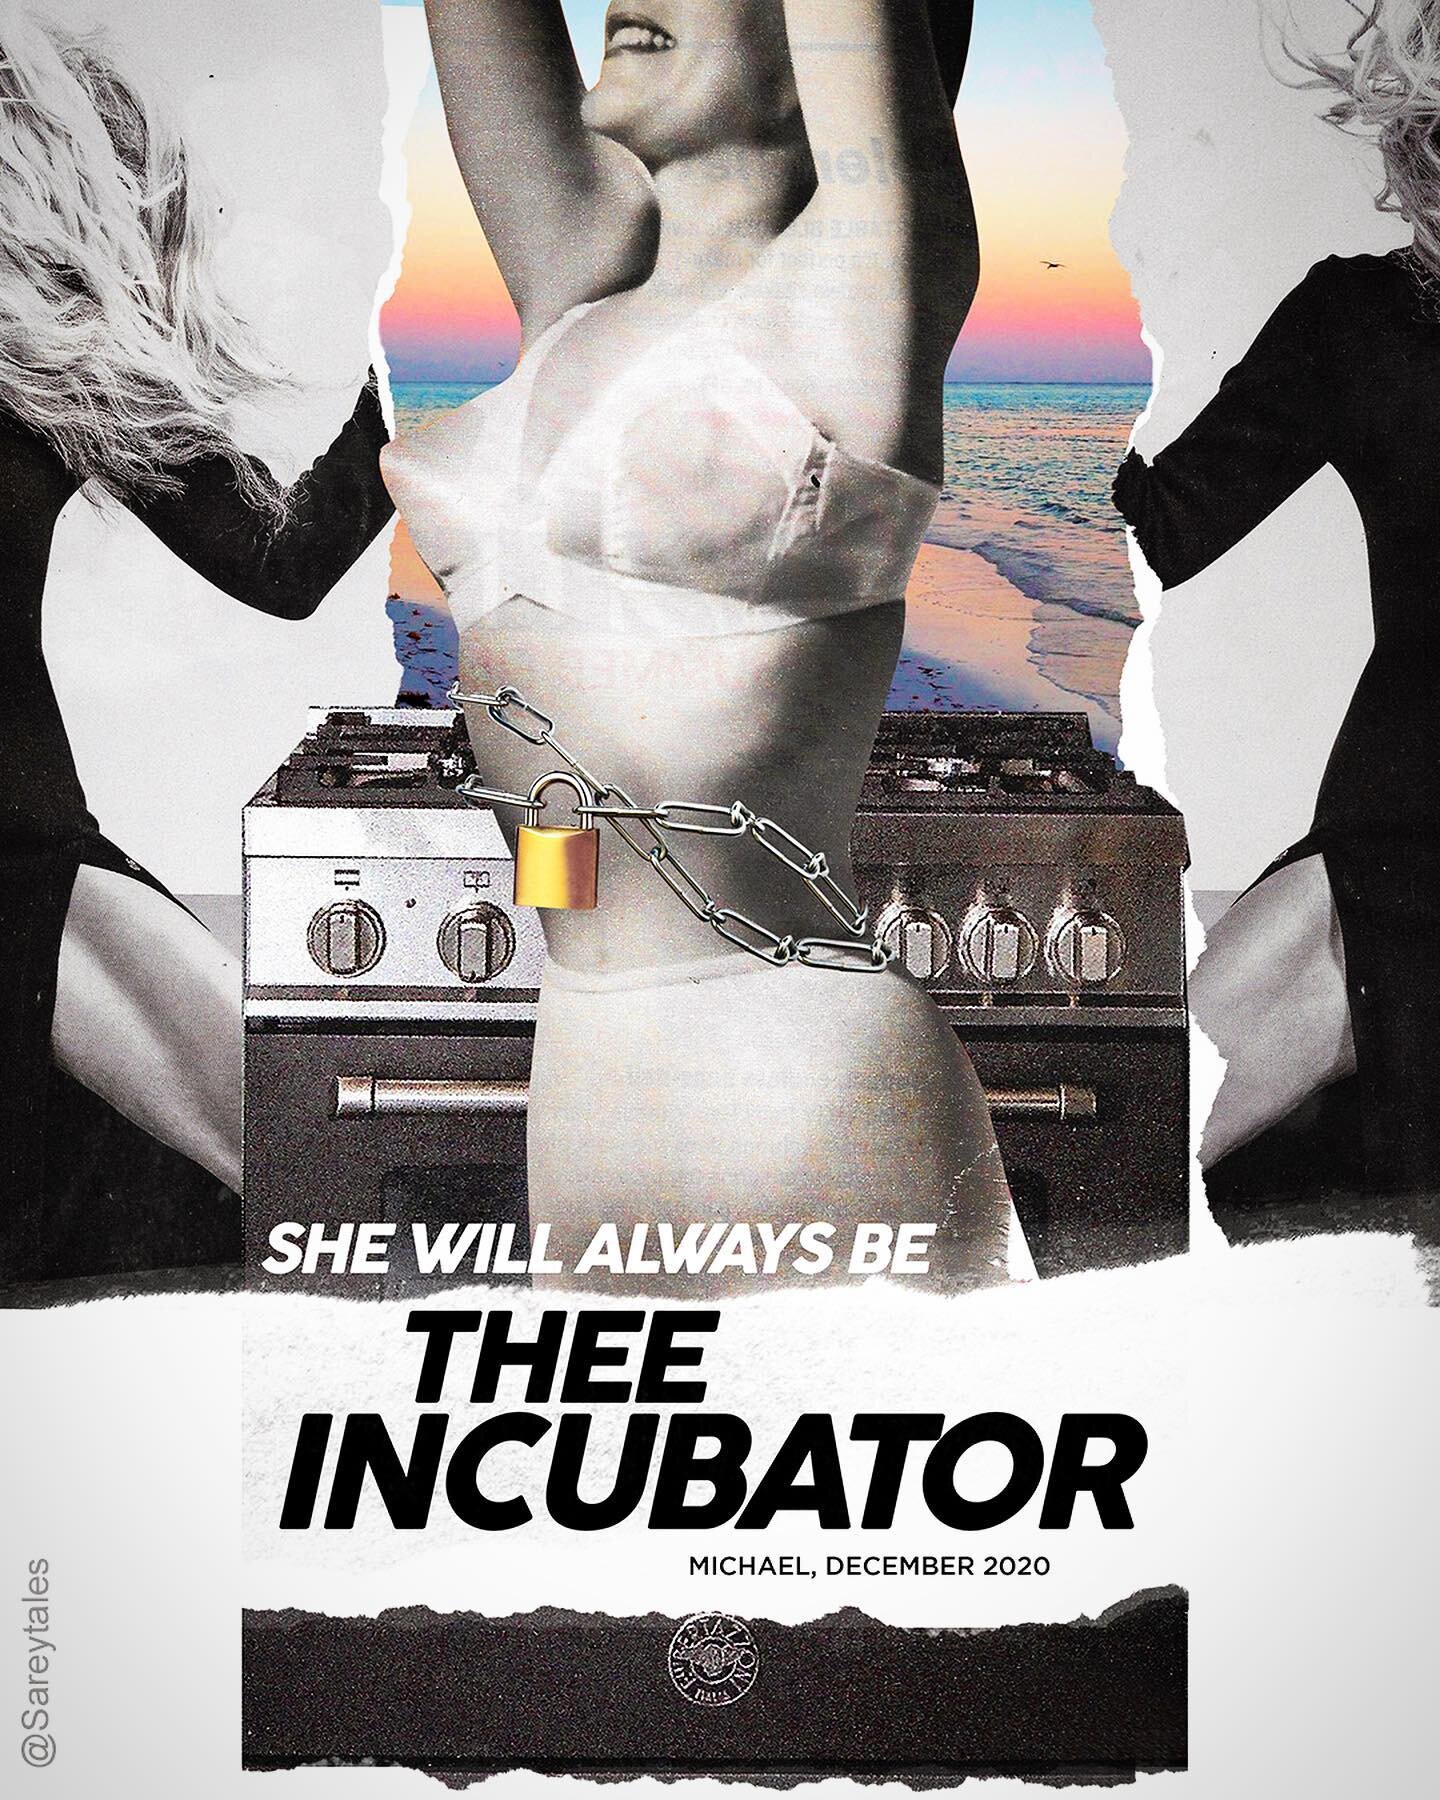 &ldquo;Woman Series: Model 3 / Thee Incubator&rdquo; ⏲🤰🏻Digital collage using photos sourced from various magazines / digital illustration / @sareytales 2021)
.
This work was originally shared in August, 2021. I will continue to reshare old work as